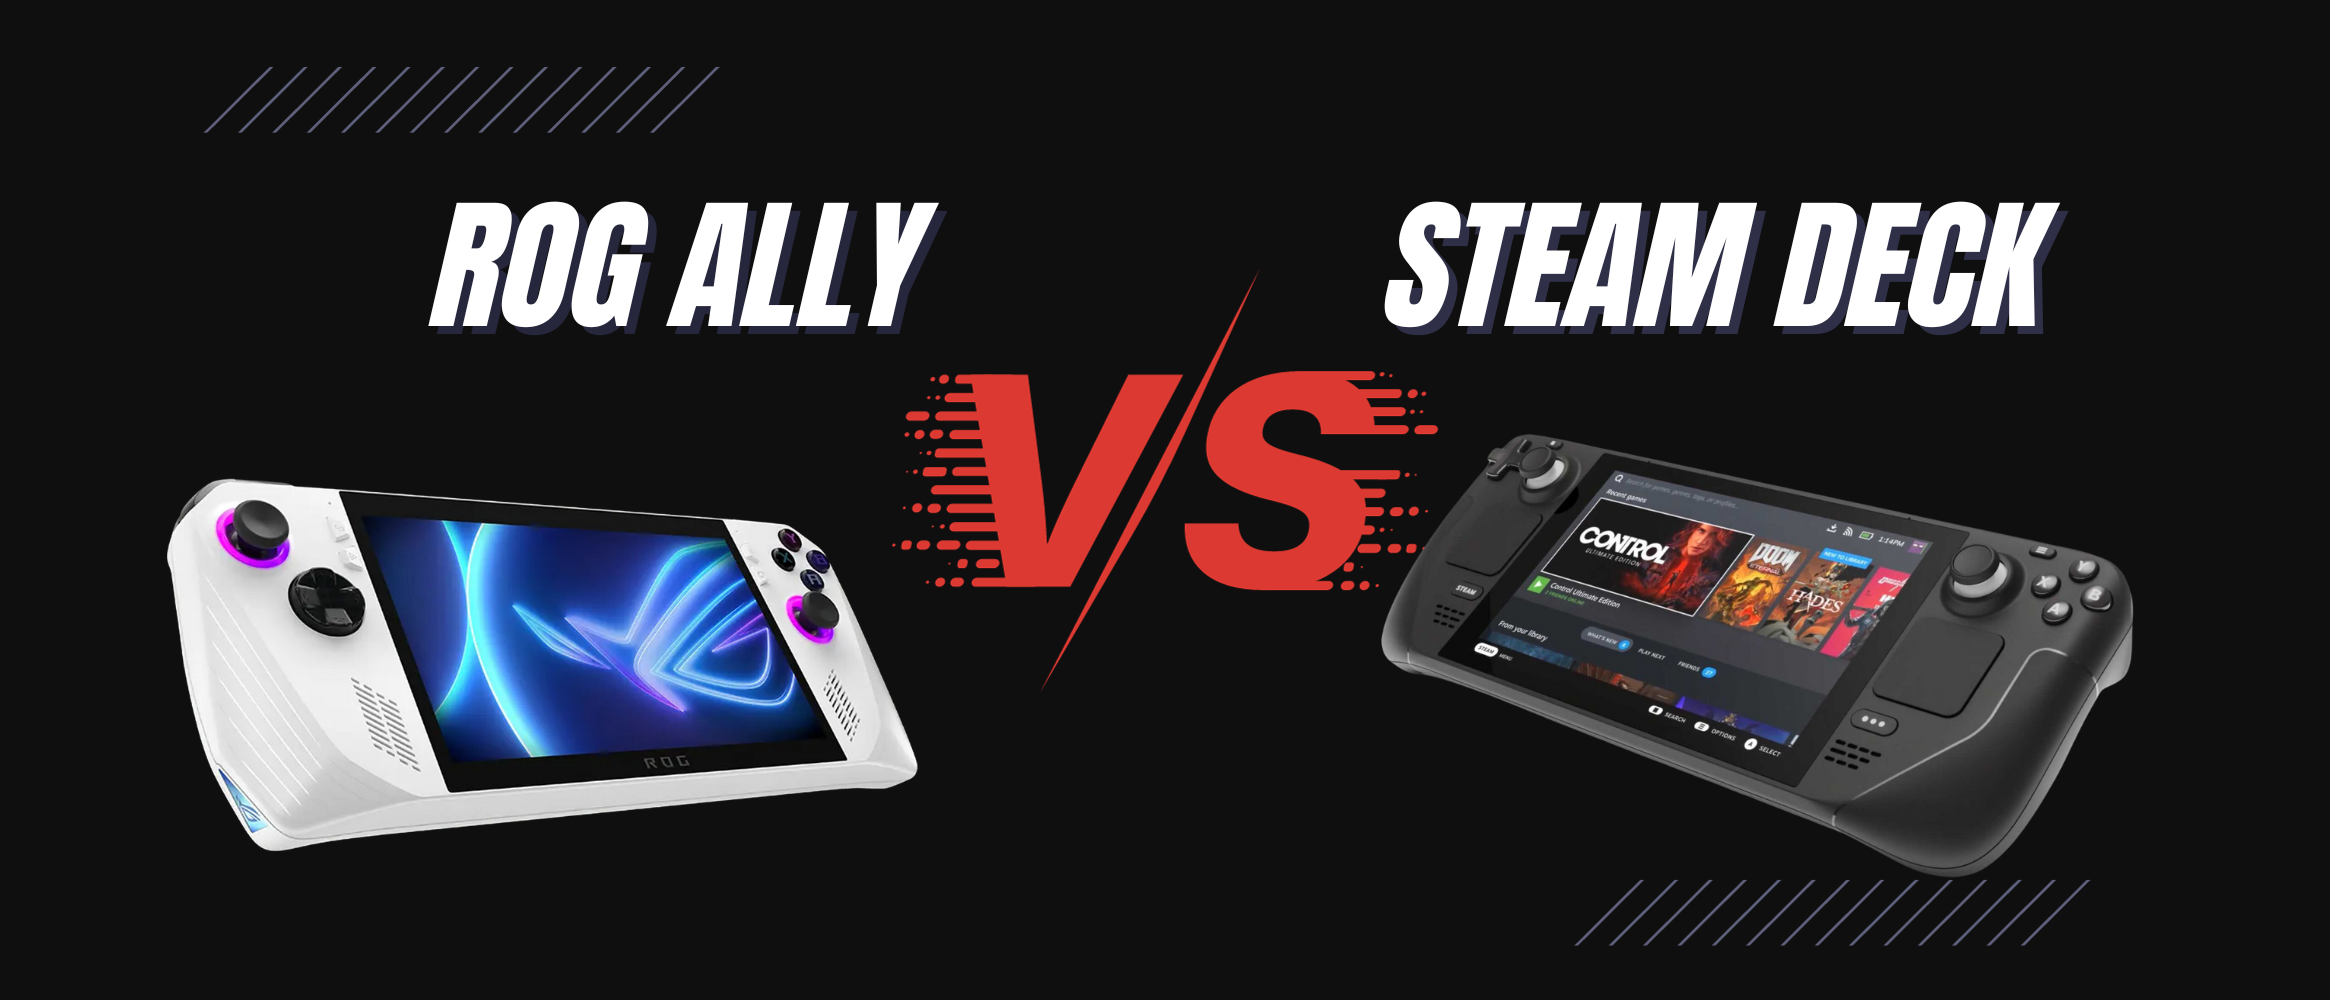 The Asus ROG Ally has me ready to ditch my Steam Deck